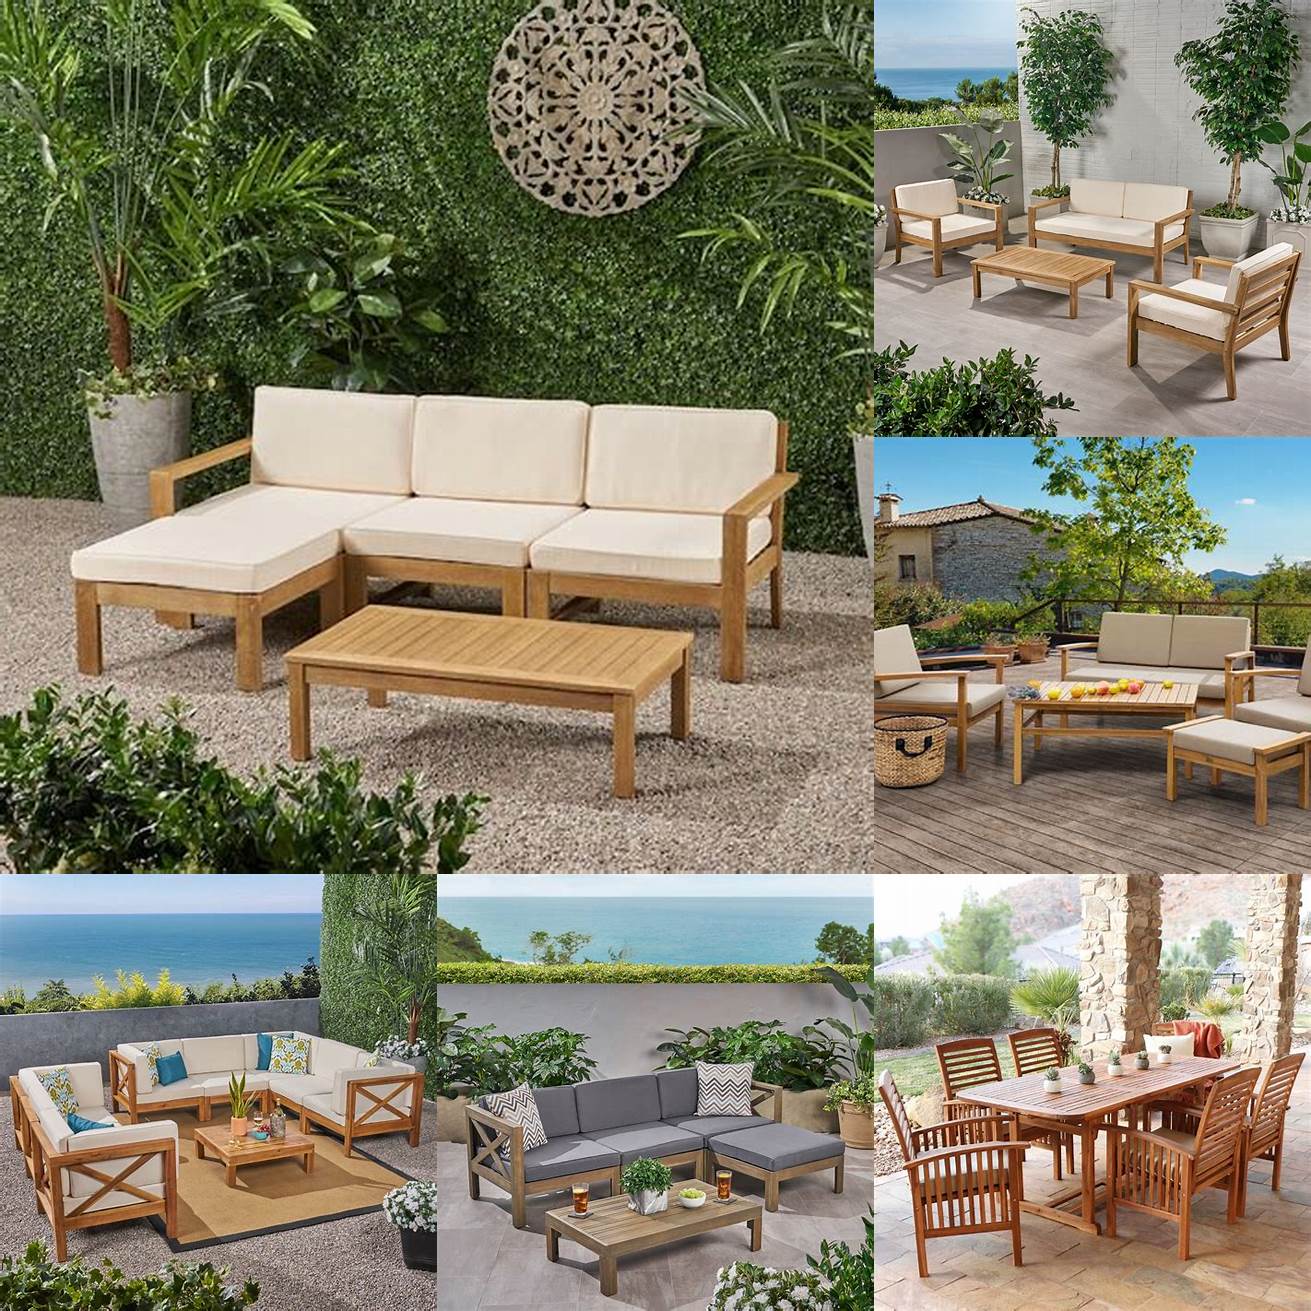 Outdoor living space with acacia furniture